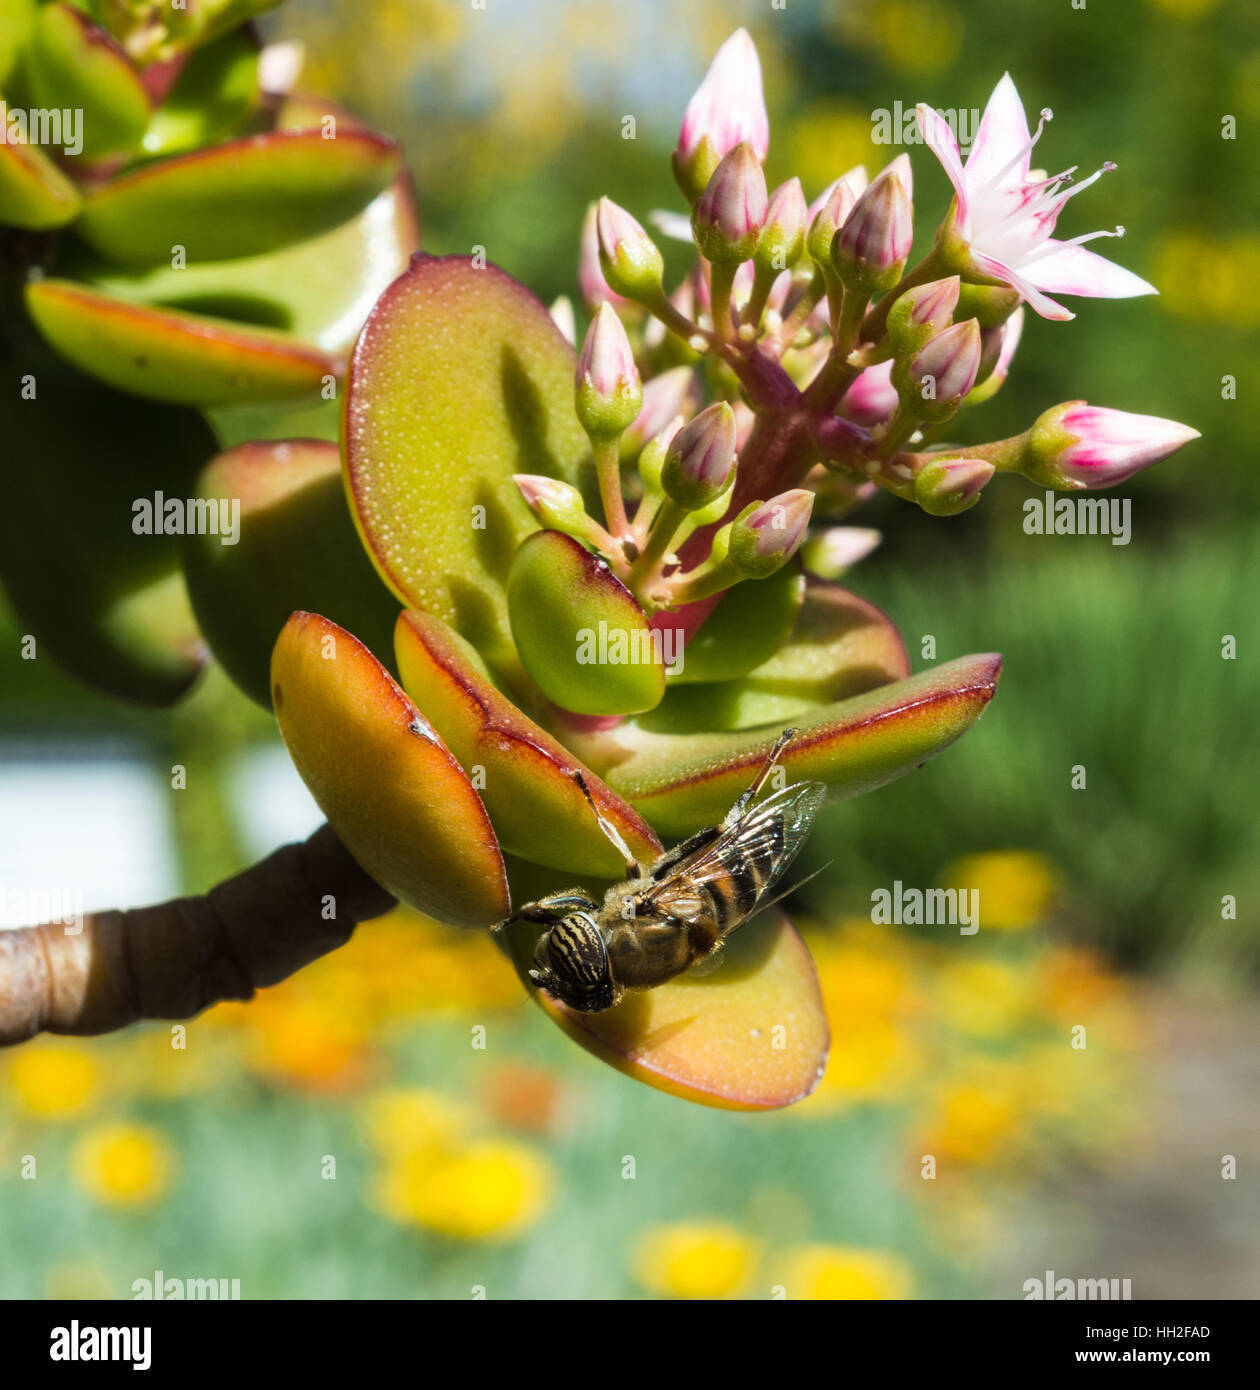 Stripe-Eyed Flower Fly on a Jade Plant Stock Photo